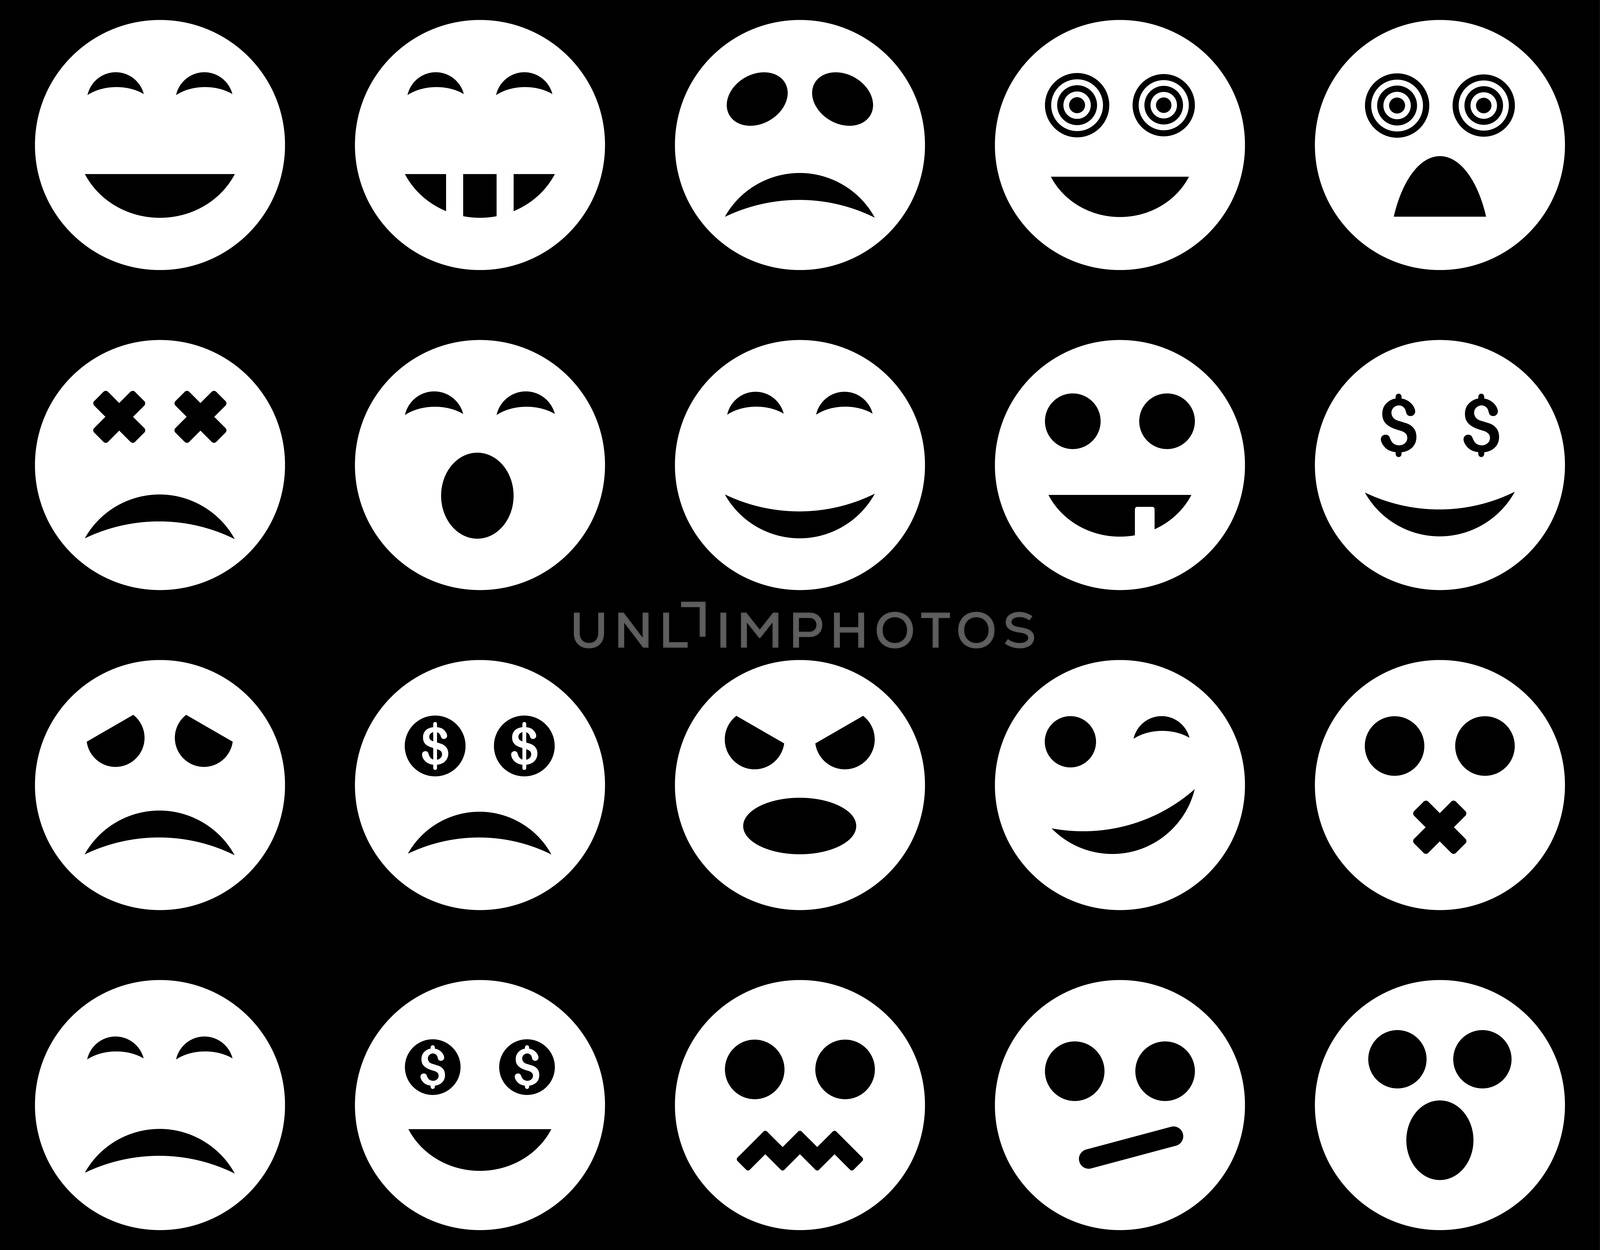 Smile and emotion icons. Glyph set style is flat images, white symbols, isolated on a black background.